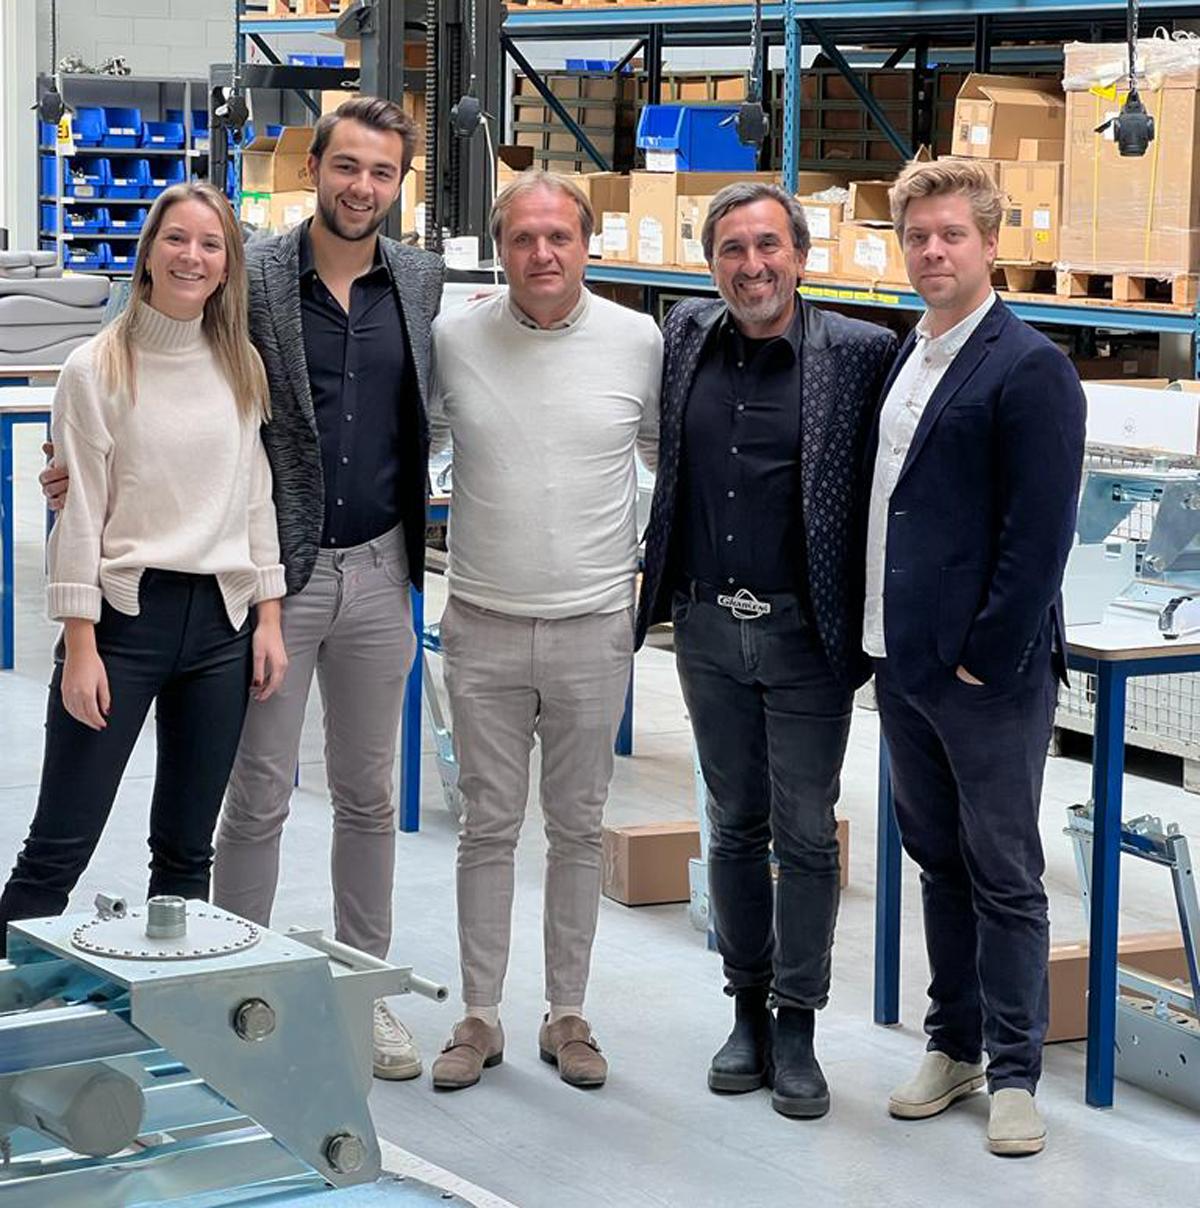 From L to R: Andrea Westerwoudt, Bentlon GM; Elias Gharieni, general operations Gharieni Germany; Ramon Spitters, CEO and director Dancohr; Sammy Gharieni, CEO and founder of Gharieni; and Manu Swevers, GM of Gharieni Netherlands / Gharieni Group